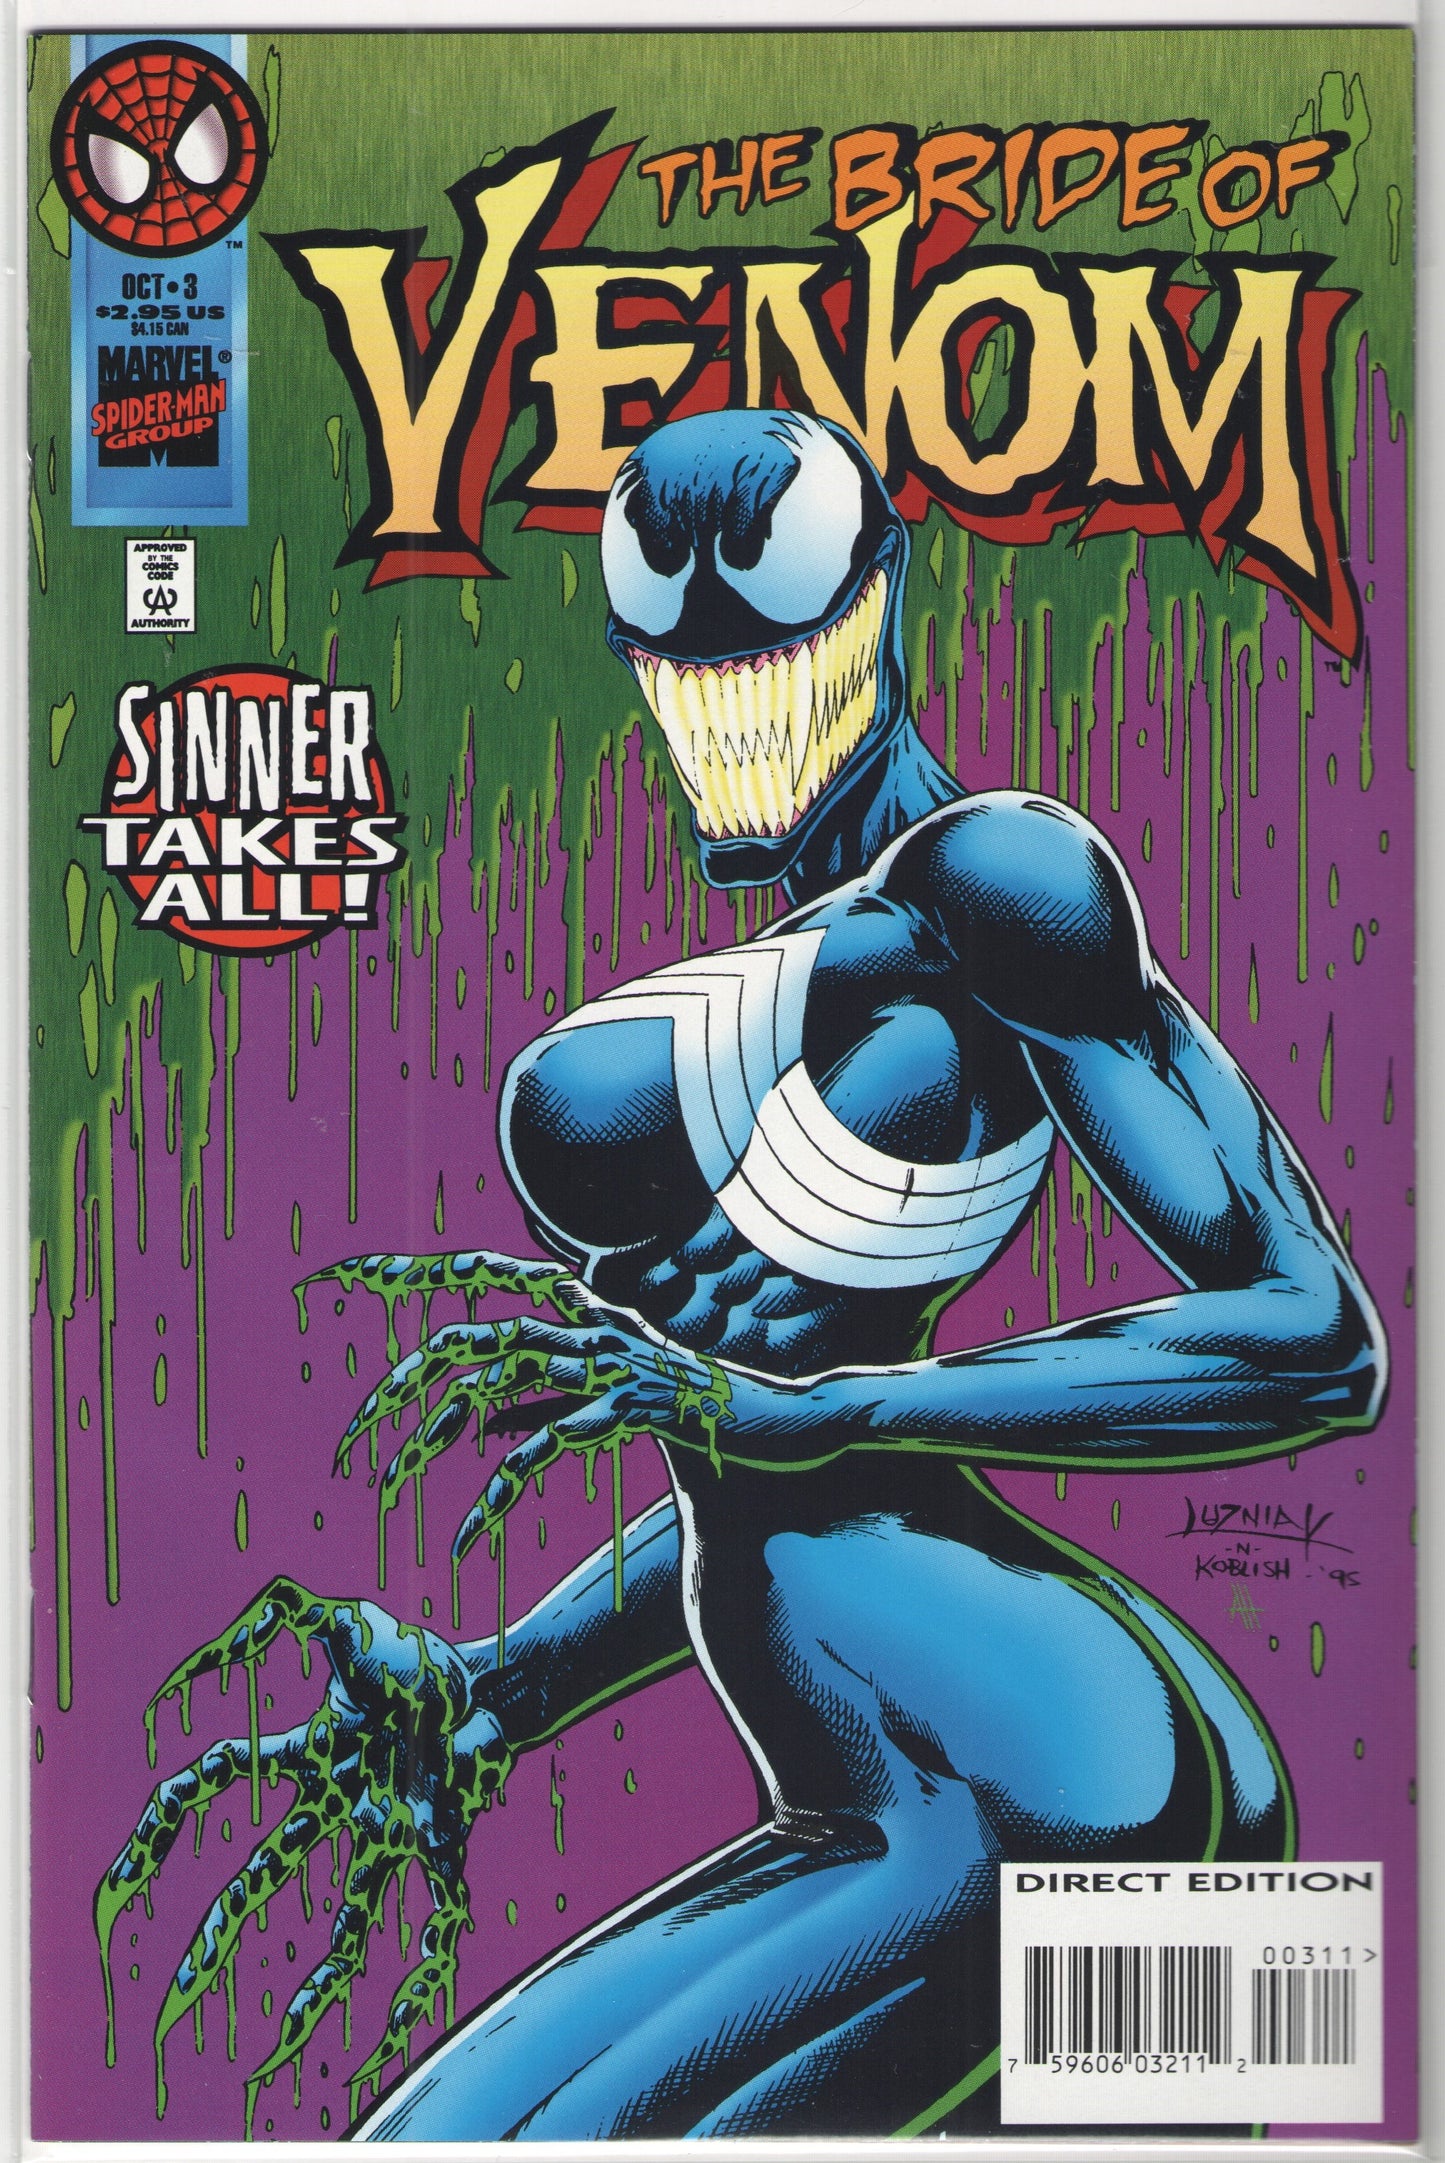 Venom: Sinner Takes (1995) All Complete Limited Series